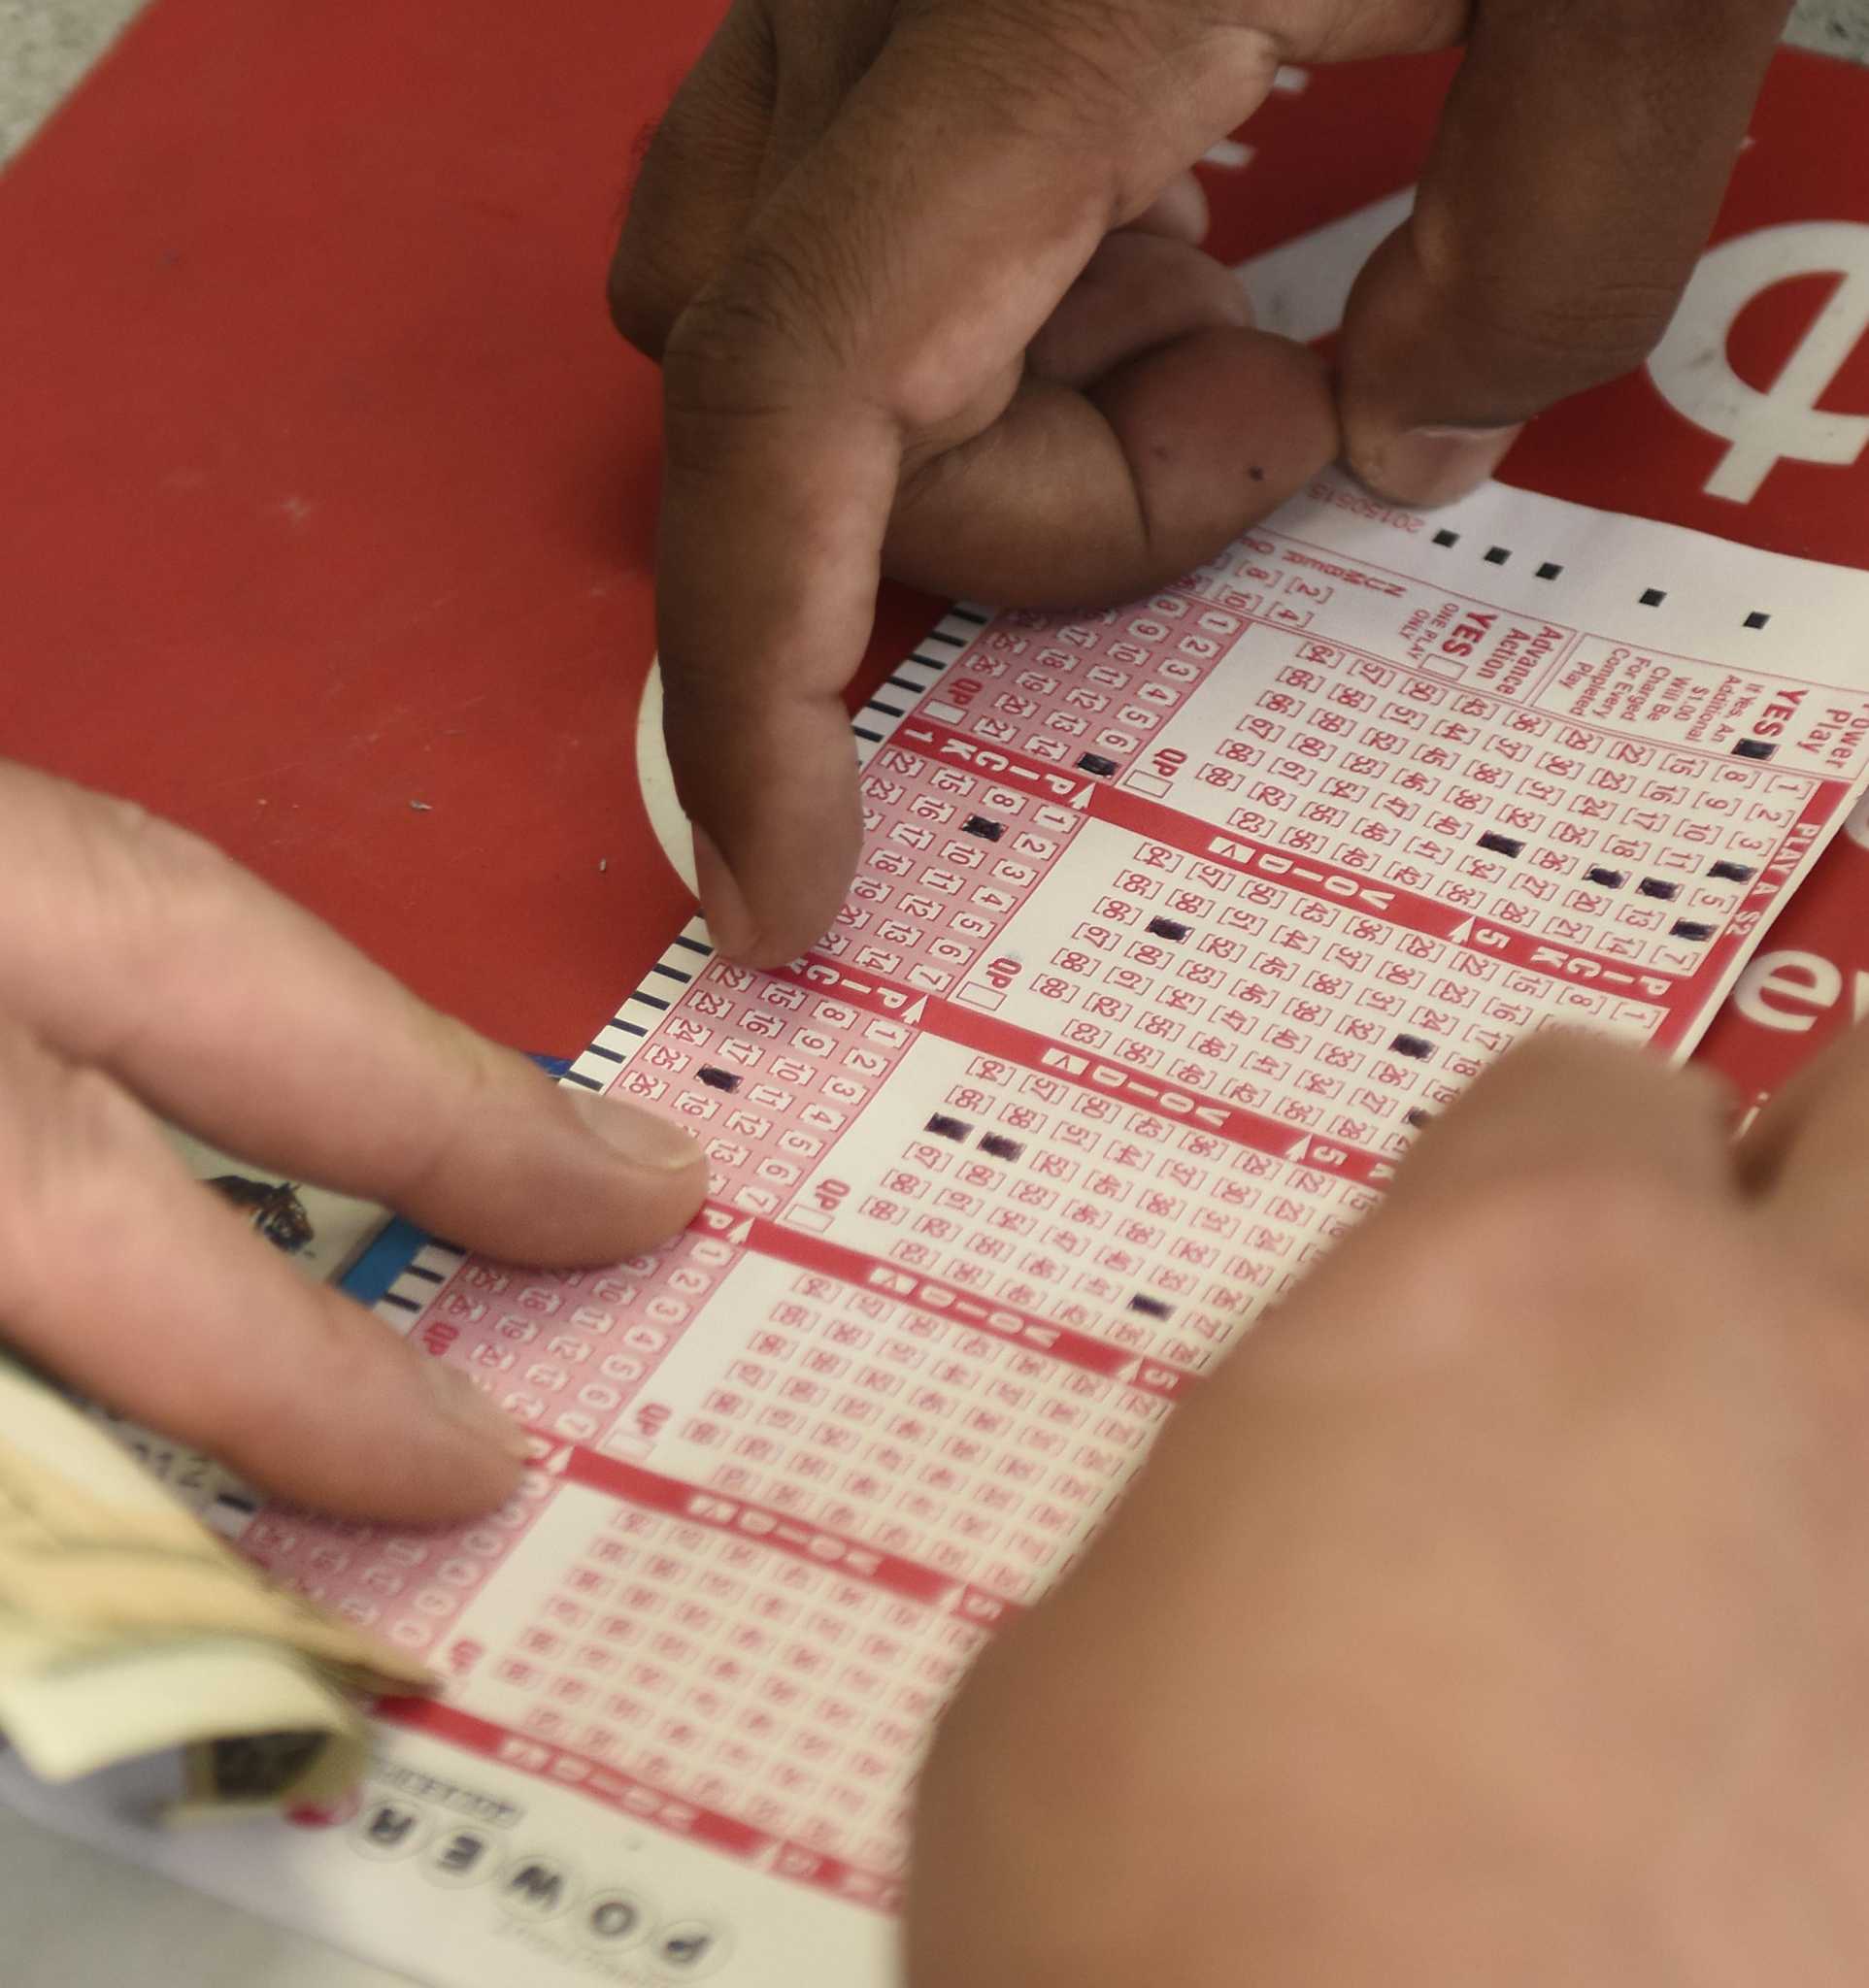 Powerball jackpot climbs to 700M ahead of Wednesday drawing